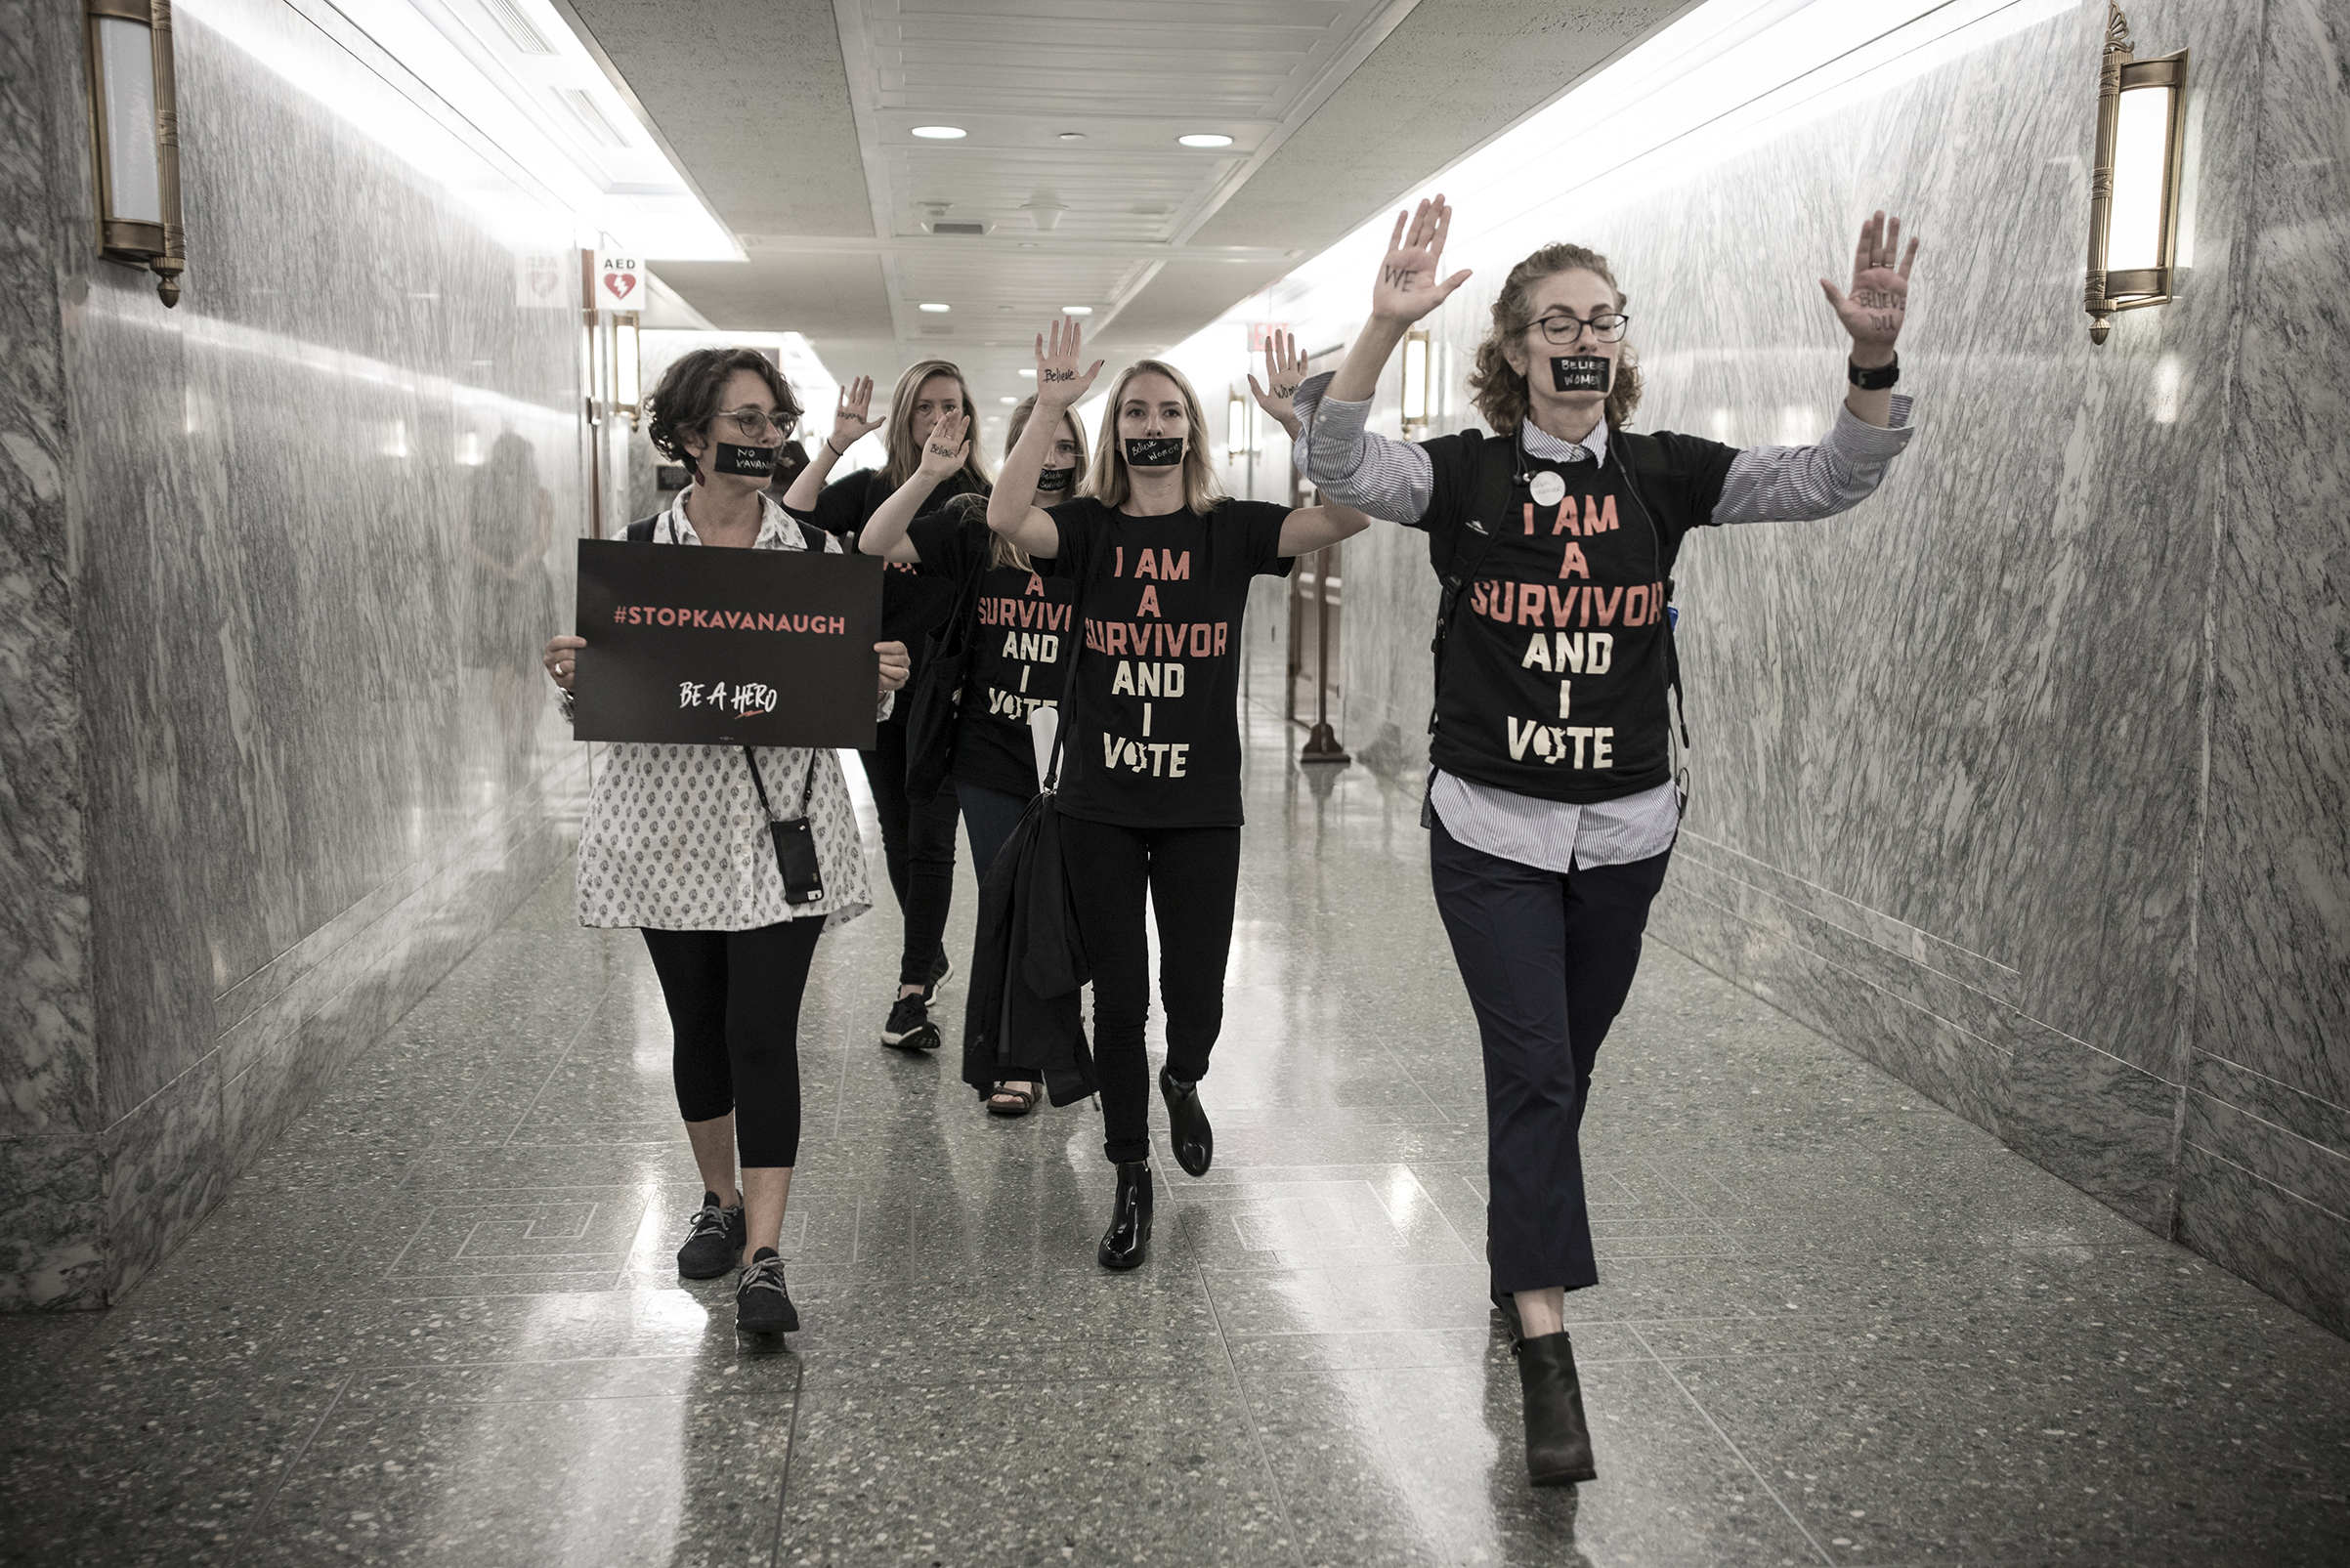 Women protested Kavanaugh’s nomination inside the Dirksen Senate Office Building in late September (David Butow—Redux for TIME)